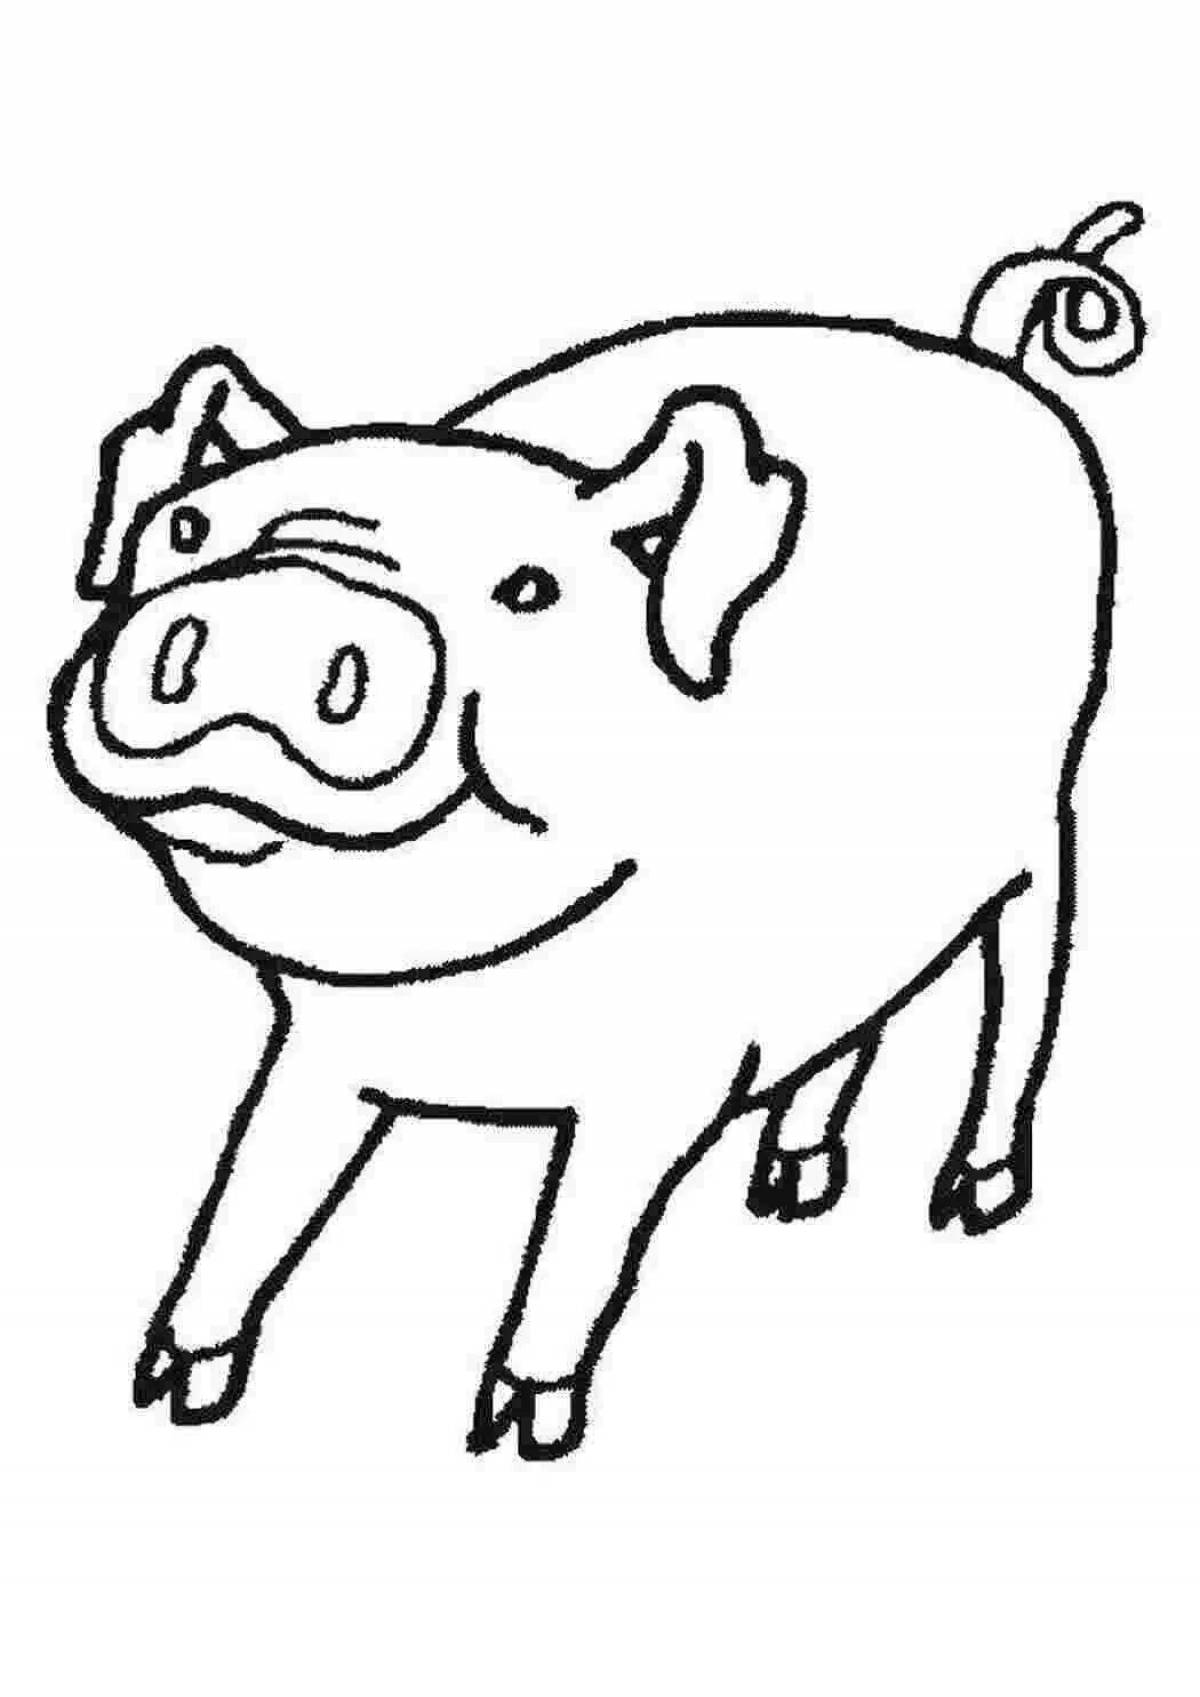 Coloring page inquisitive mini pig